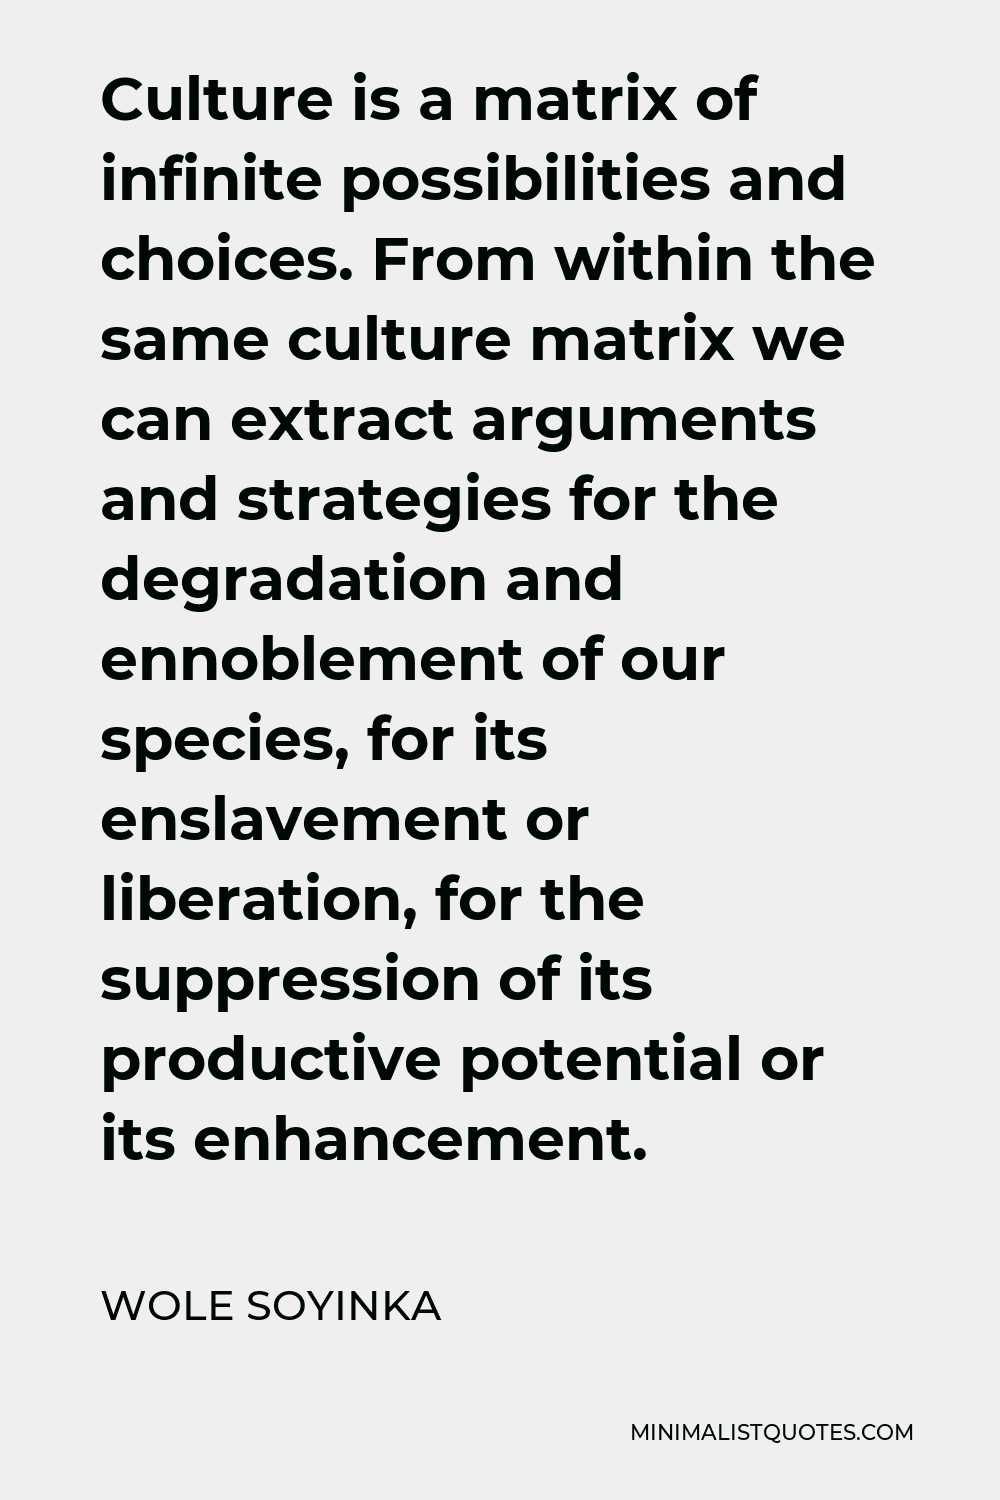 Wole Soyinka Quote - Culture is a matrix of infinite possibilities and choices. From within the same culture matrix we can extract arguments and strategies for the degradation and ennoblement of our species, for its enslavement or liberation, for the suppression of its productive potential or its enhancement.